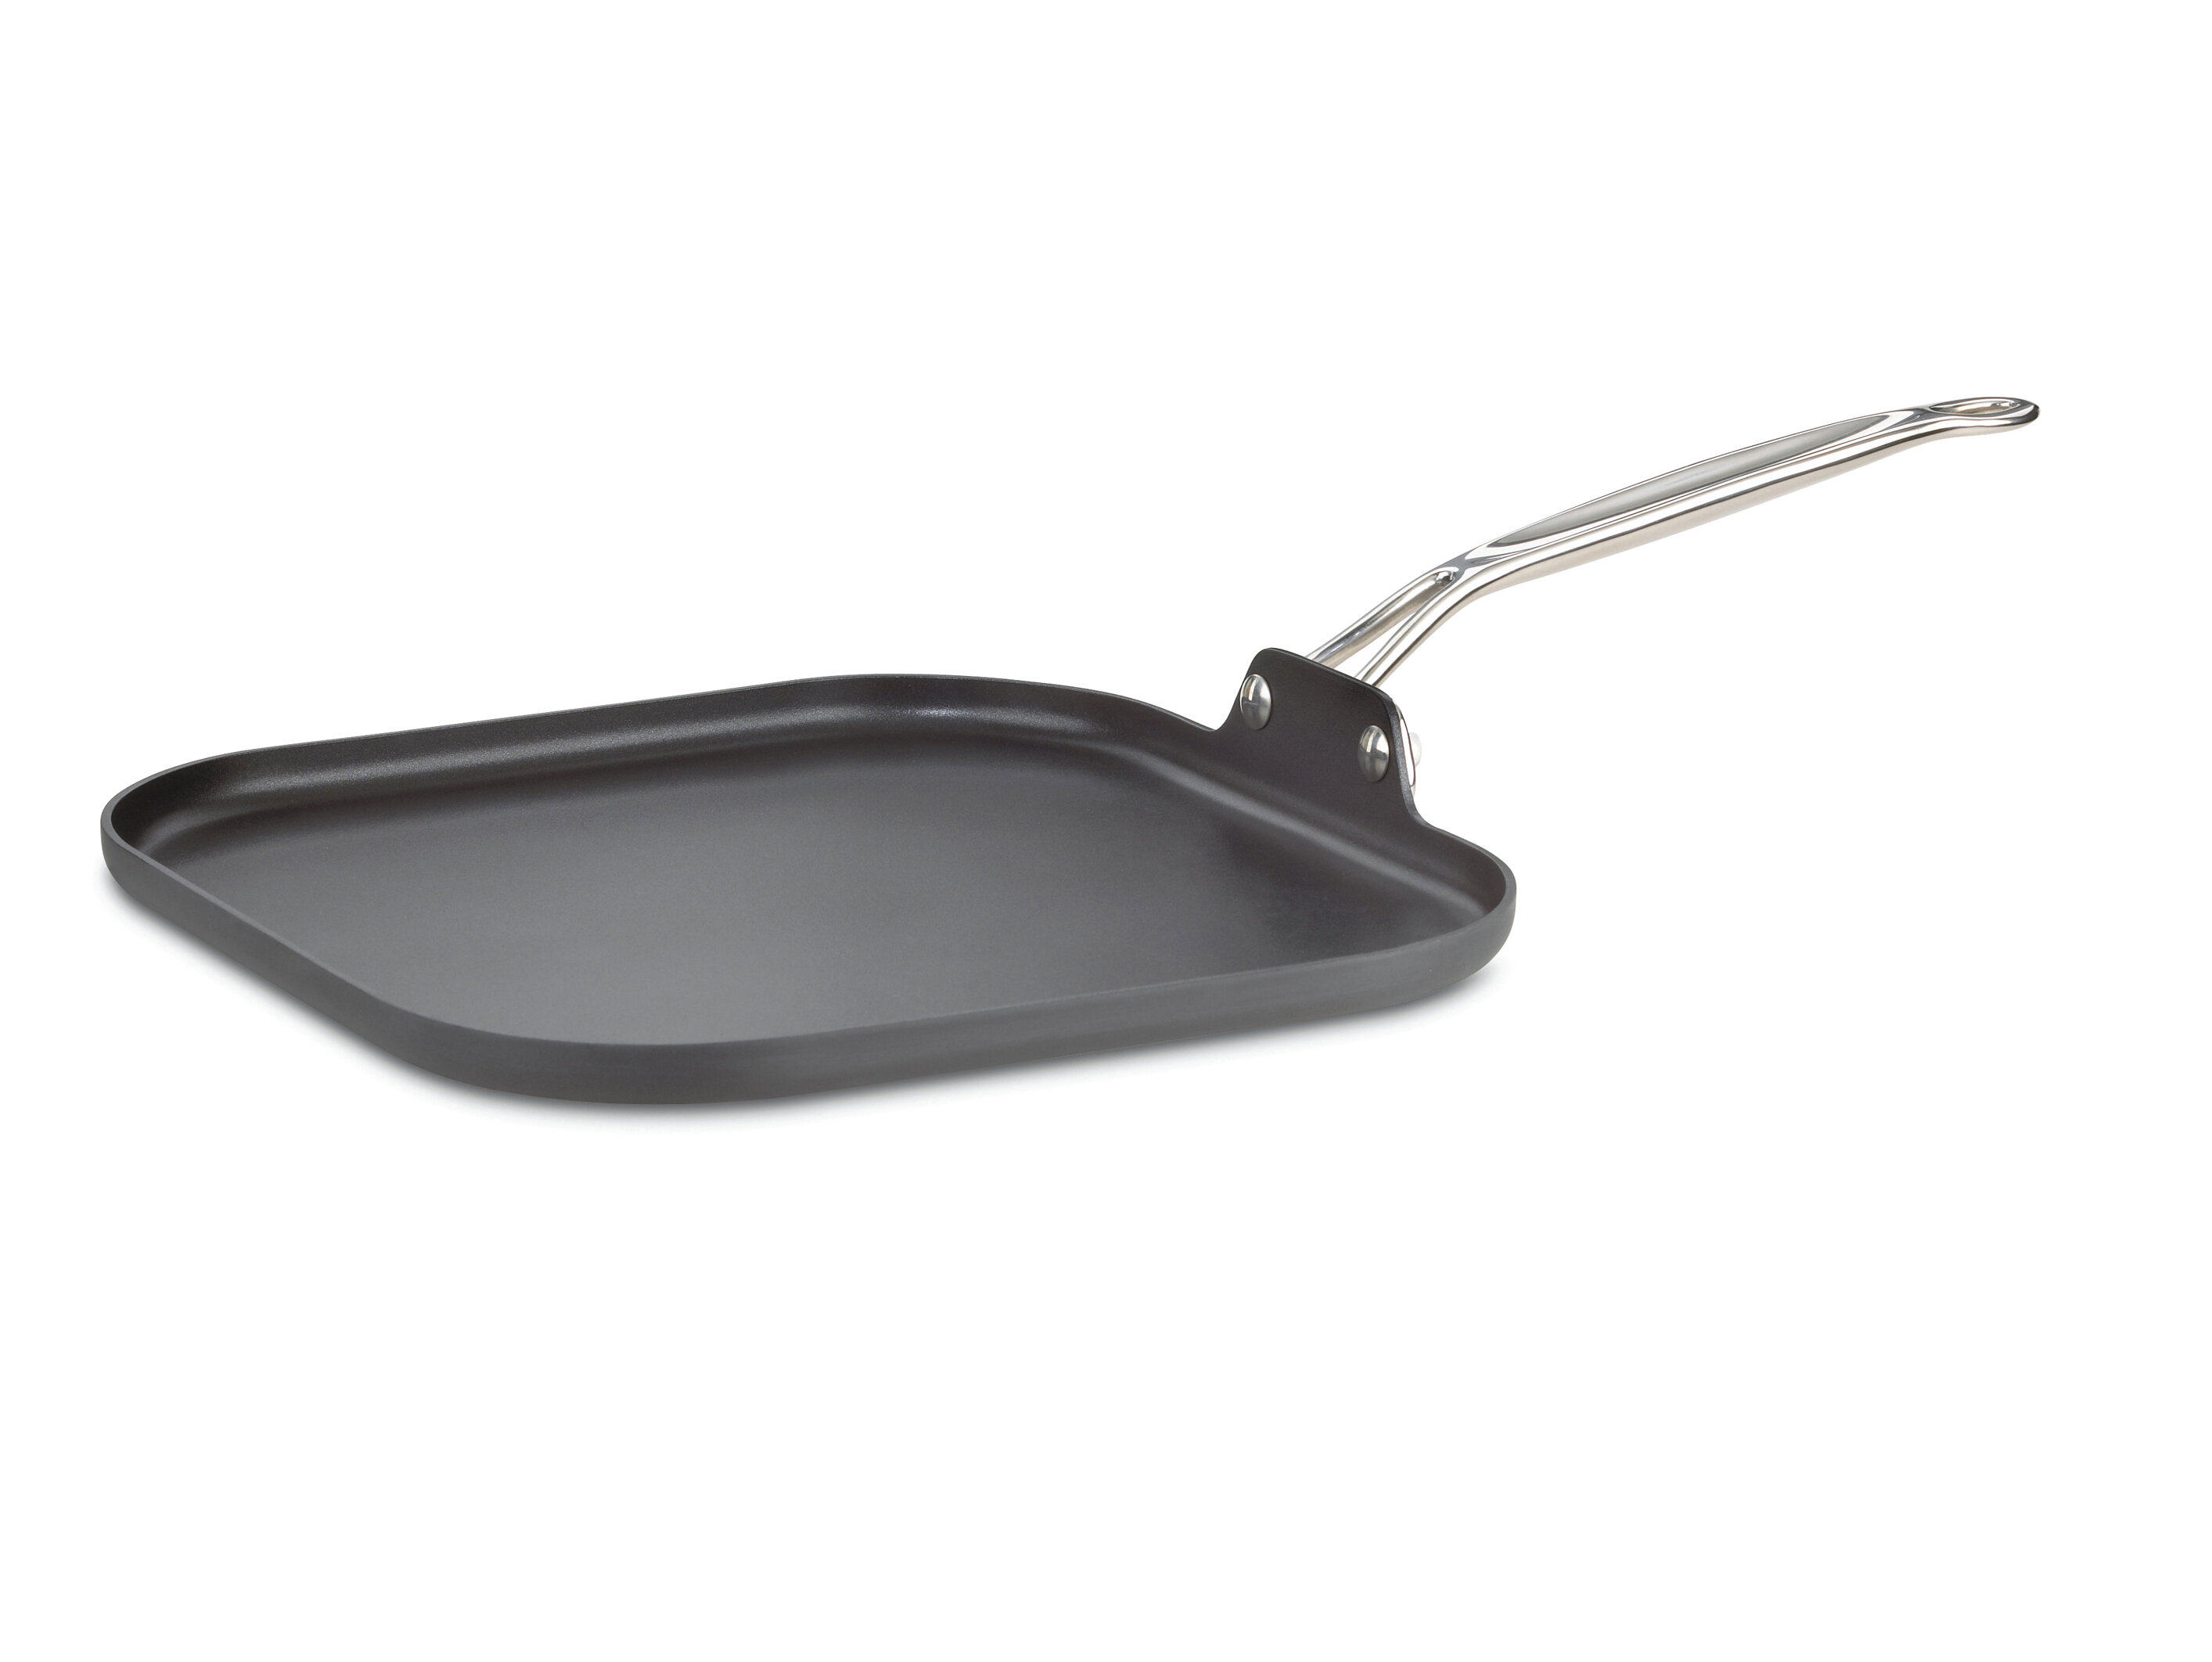  All-Clad HA1 Hard Anodized Nonstick Griddle 11 x 11